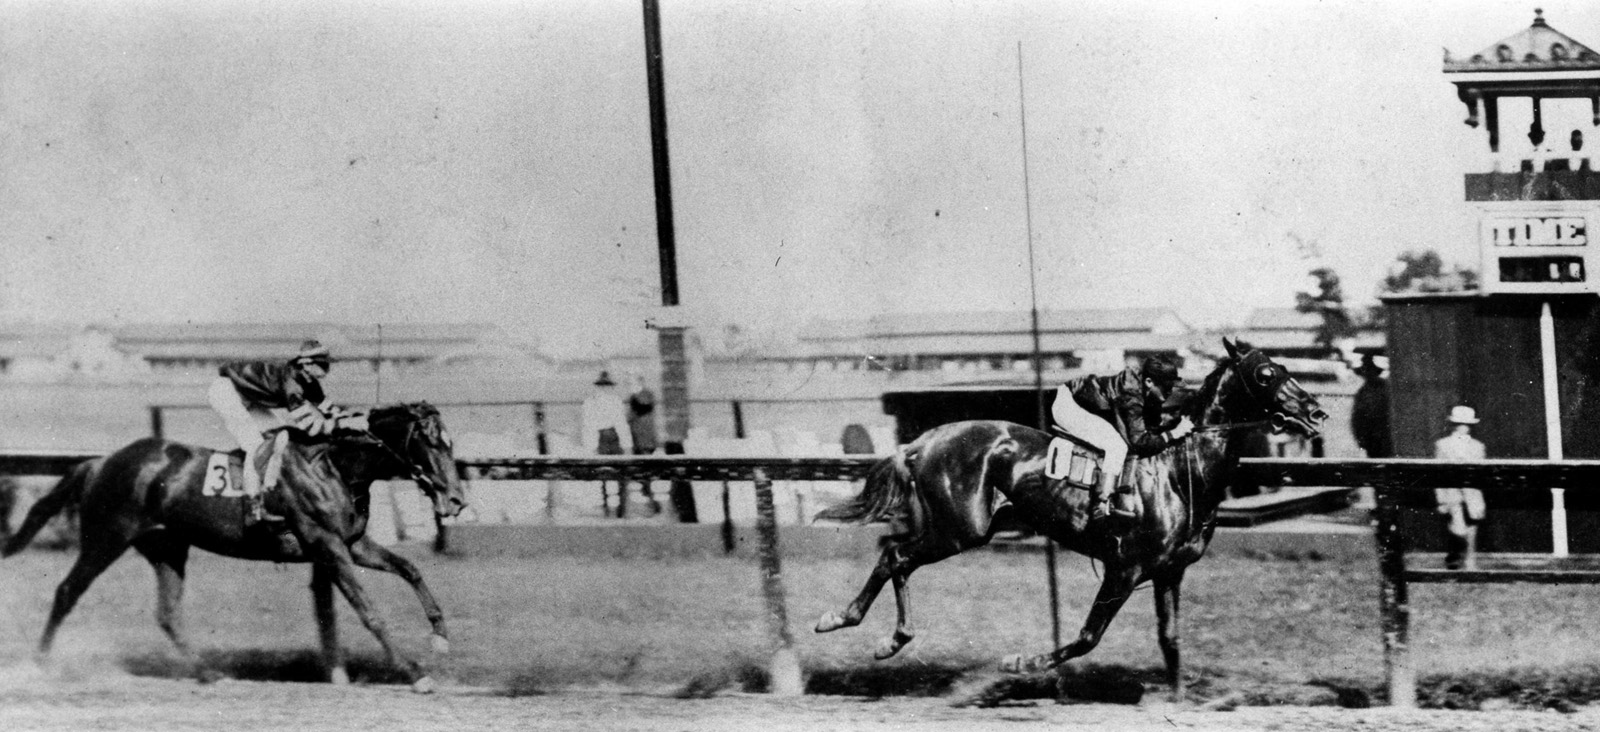 Fair Play racing to the finish in an unknown race (Museum Collection)